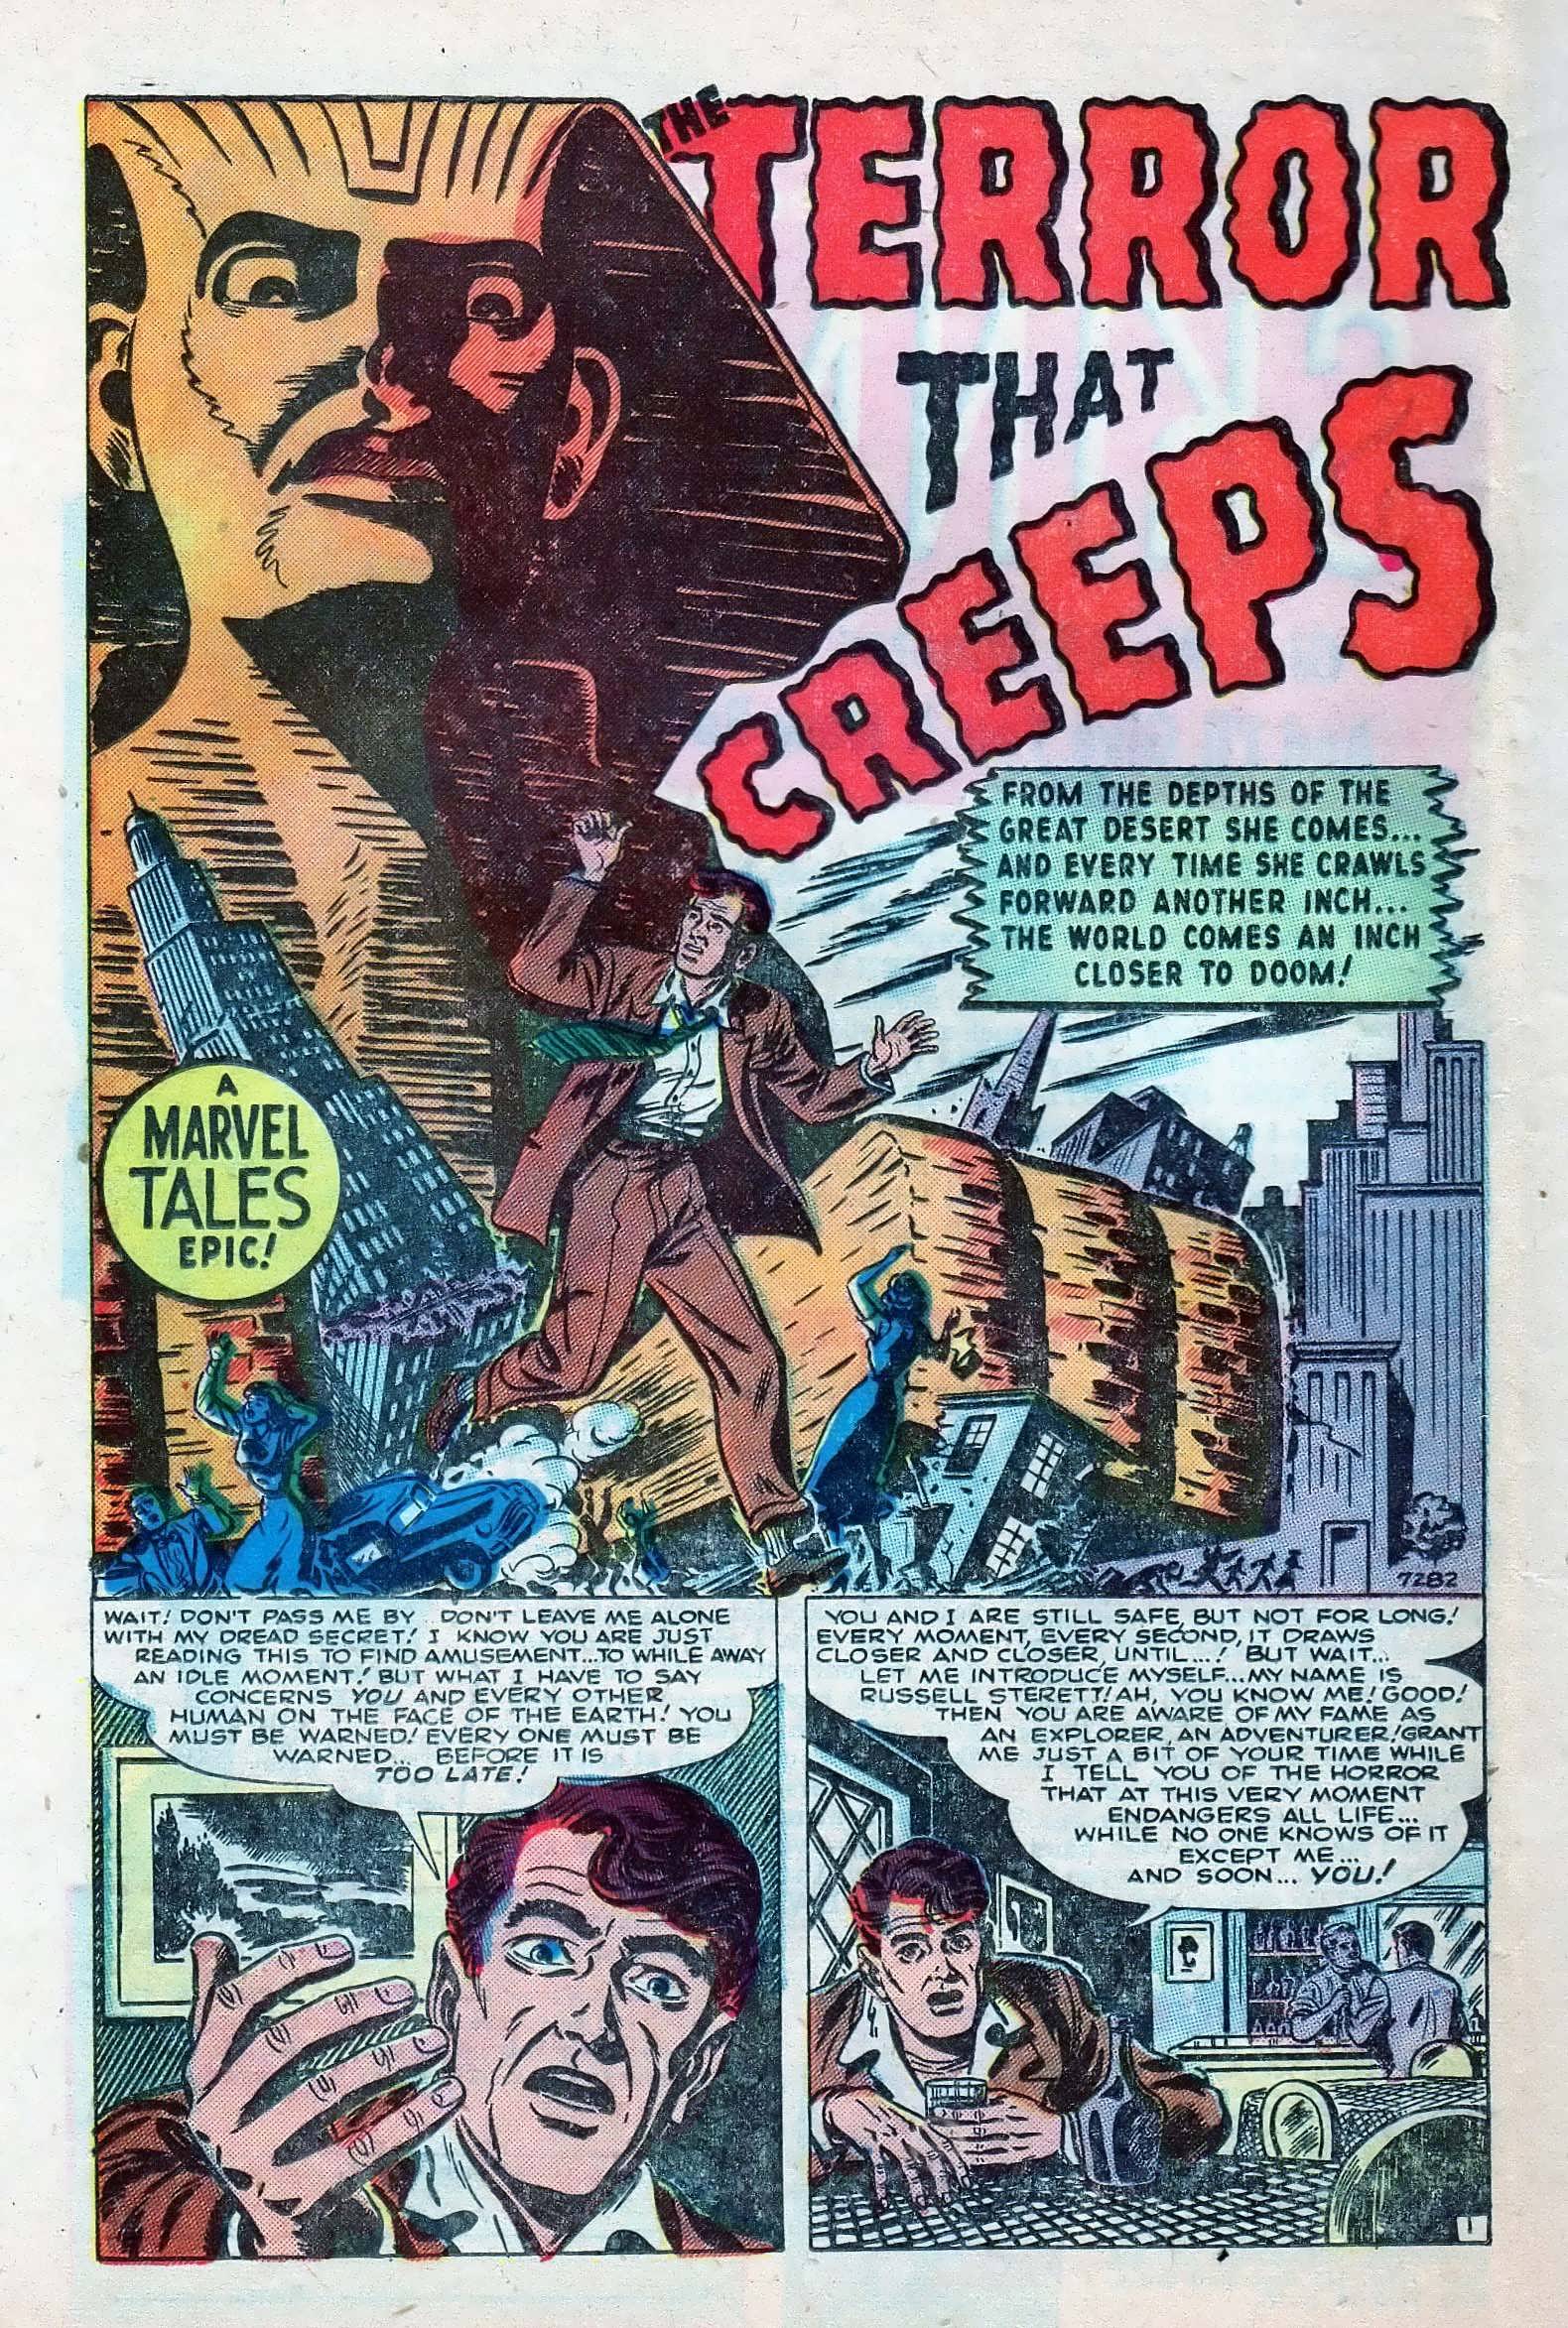 Marvel Tales (1949) 96 Page 41